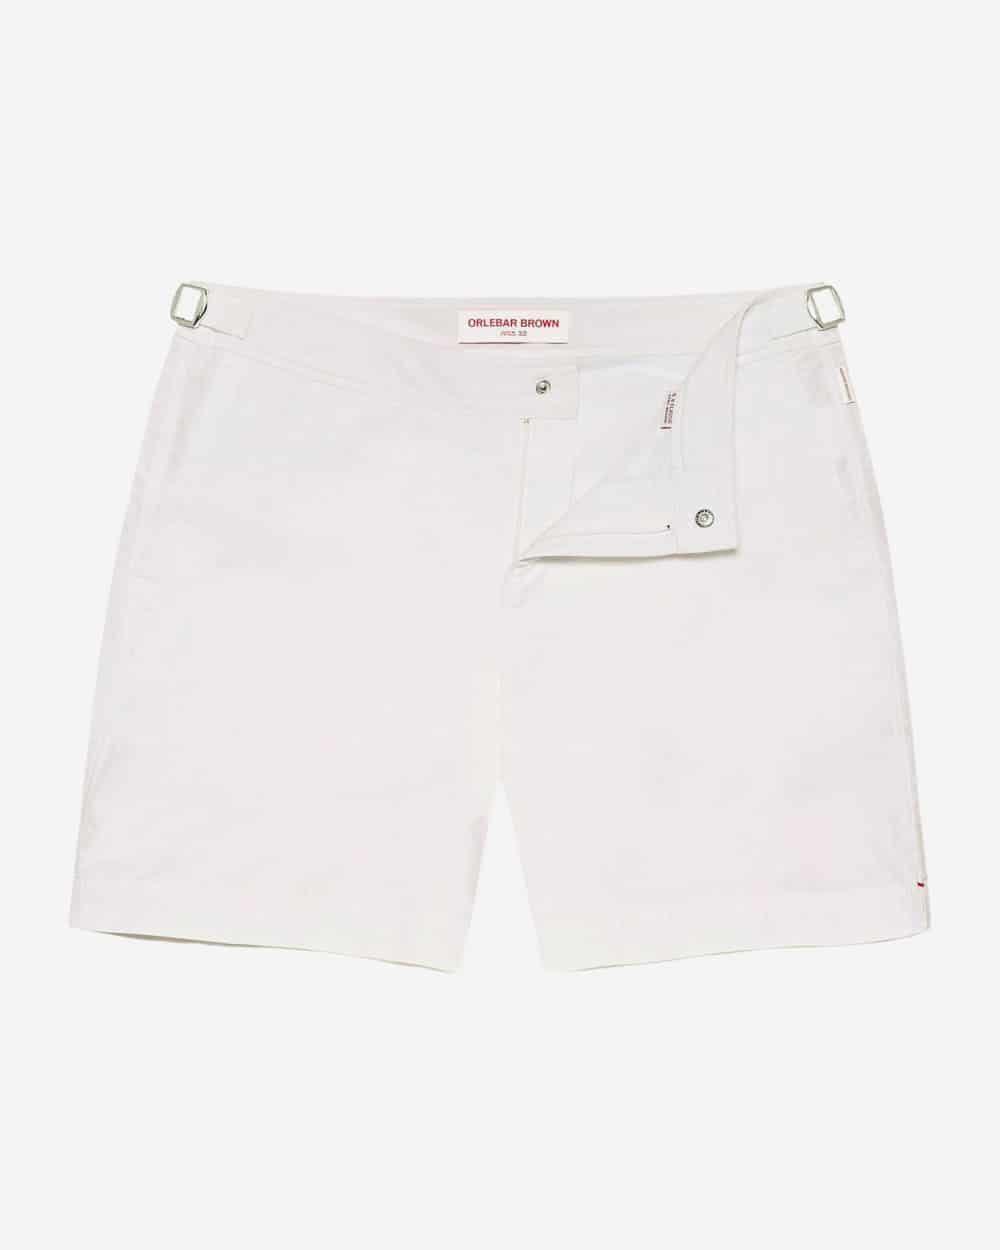 The Most Stylish Tailored Swim Shorts For Men (Summer 2023)